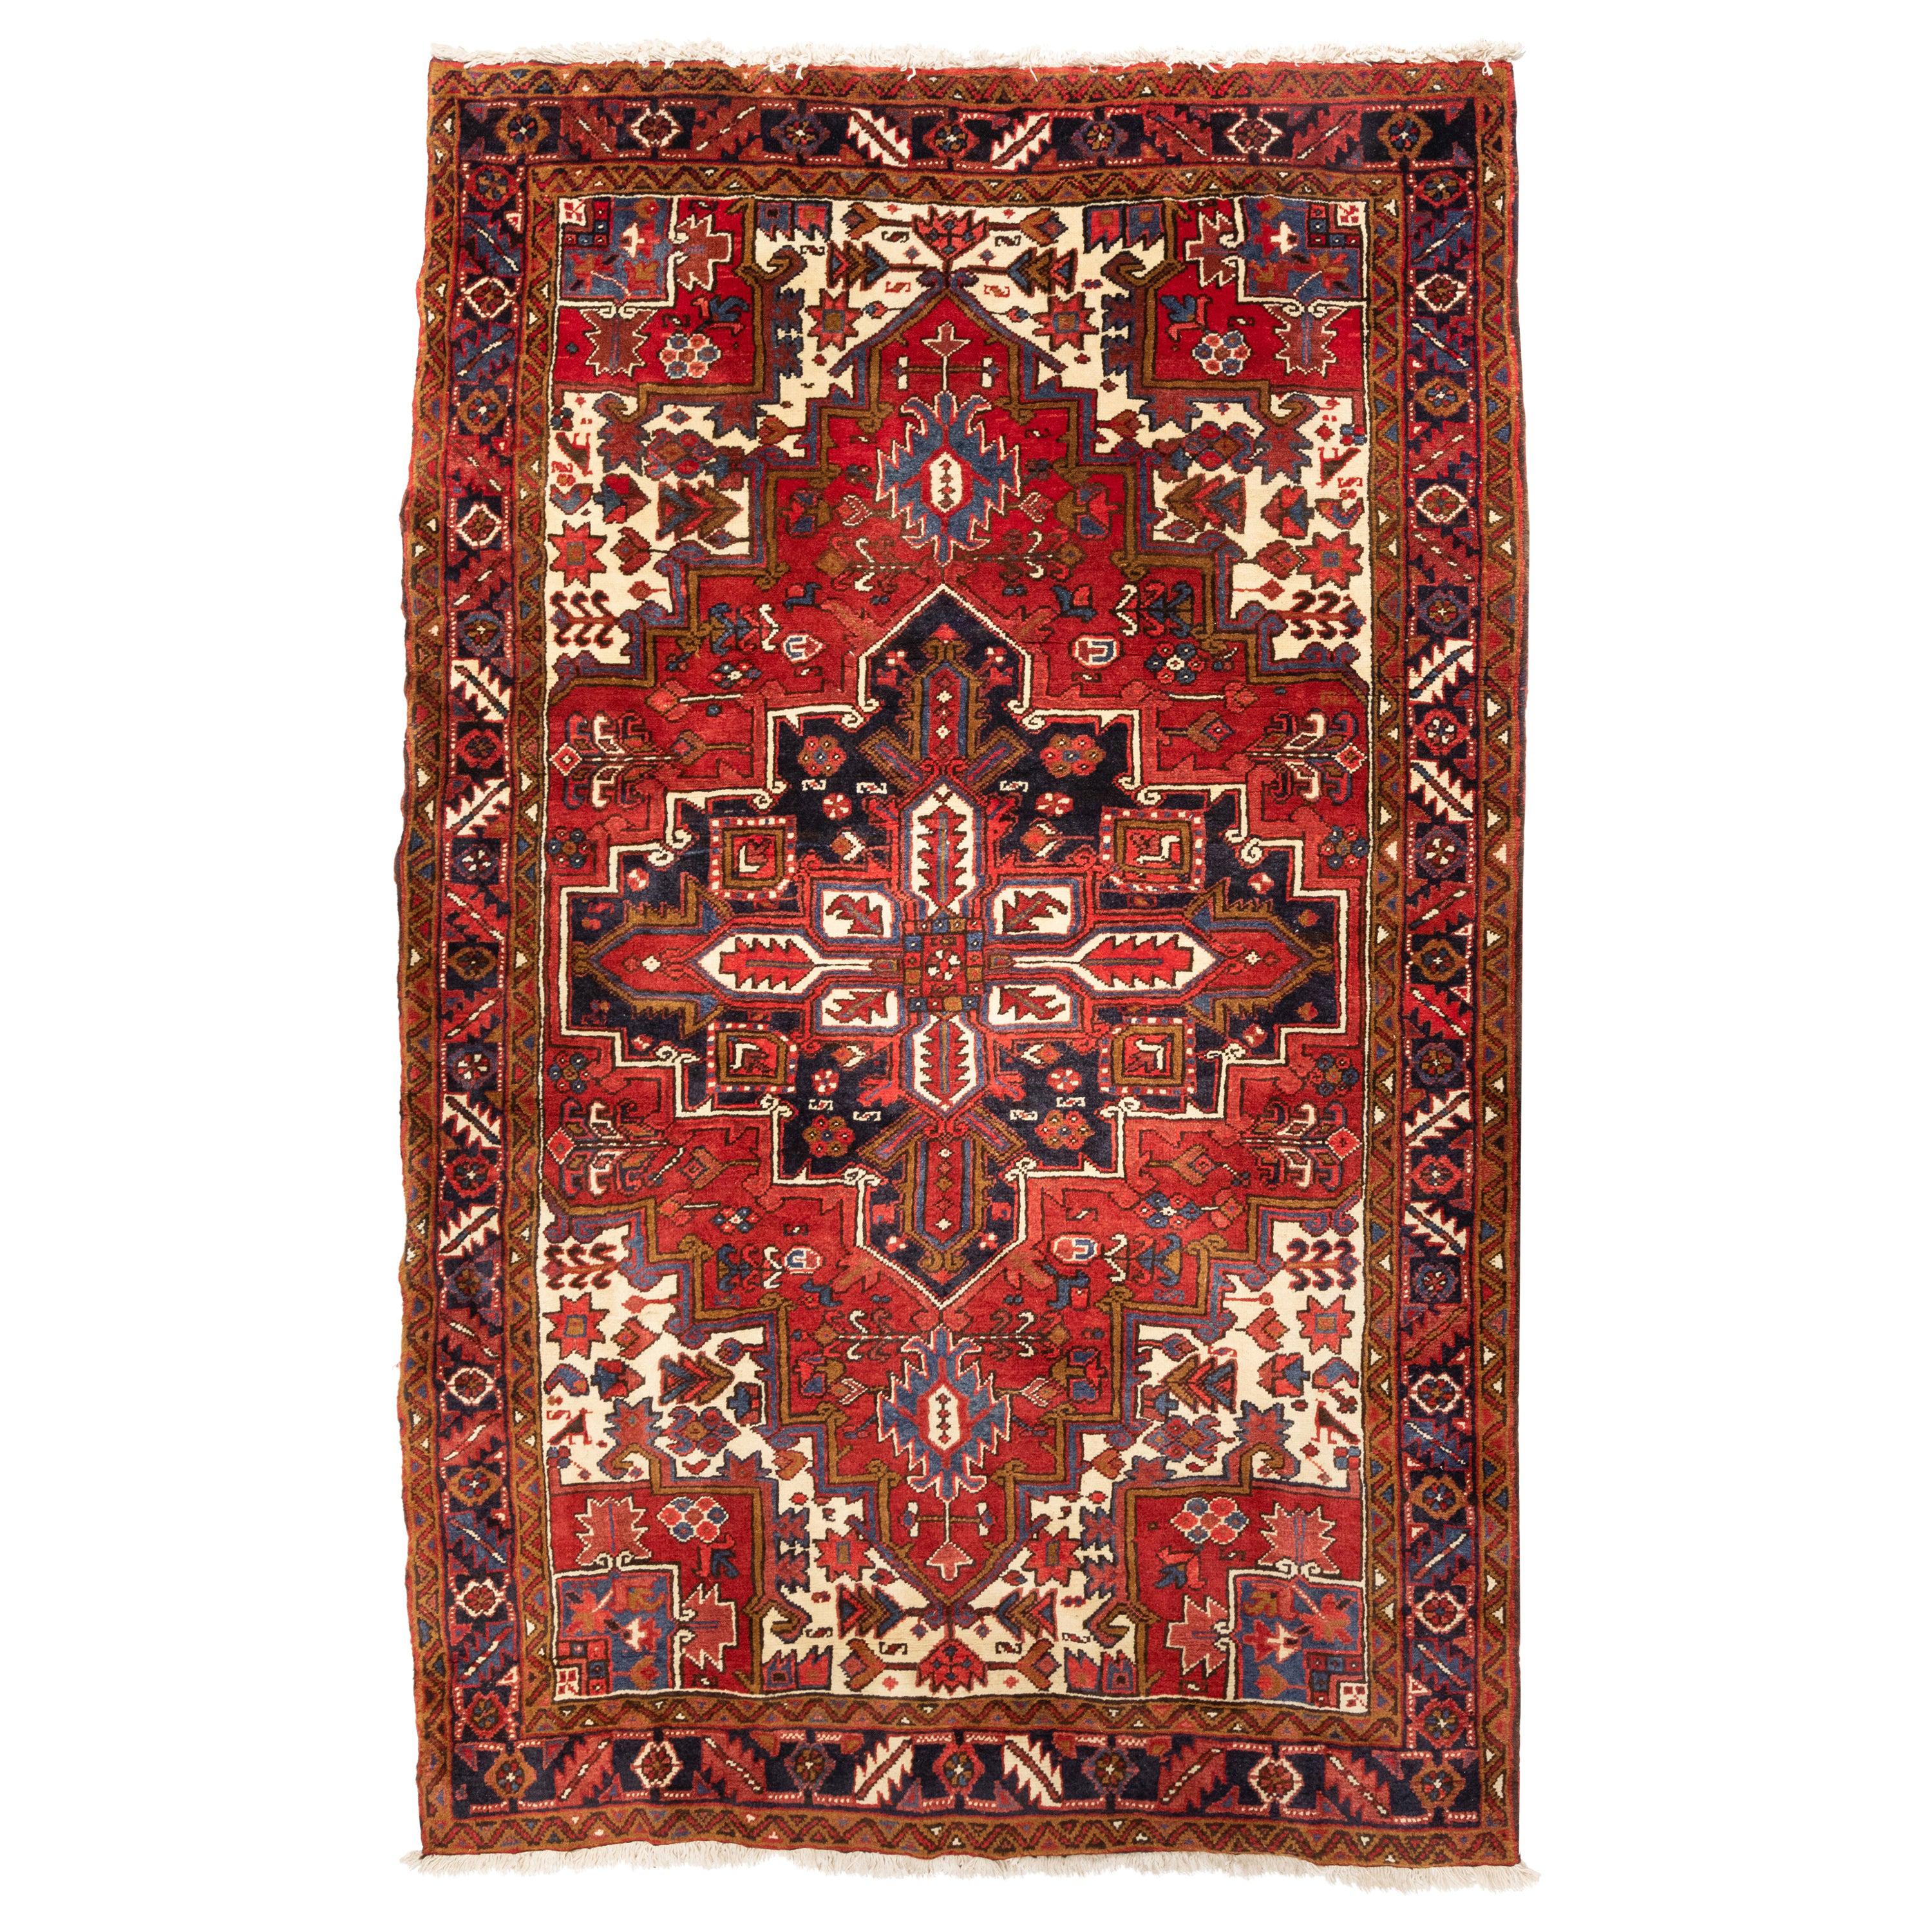 Antique Persian Red Ivory and Navy Blue Geometric Tribal Heriz Rug